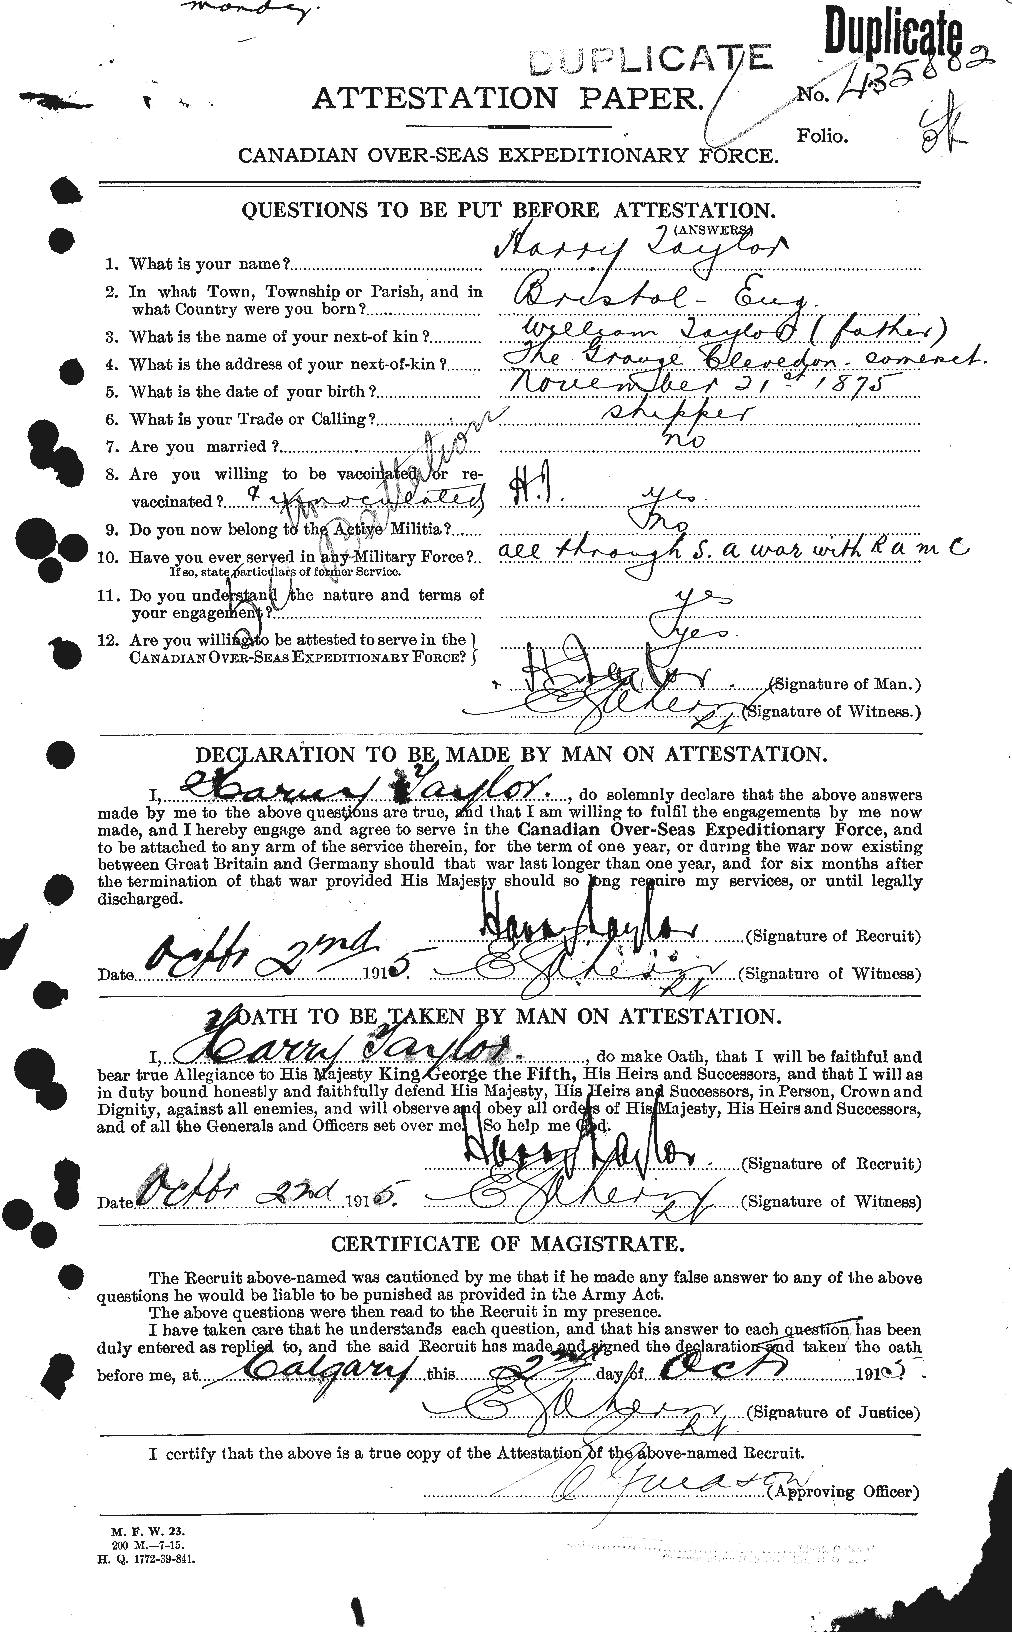 Personnel Records of the First World War - CEF 626476a